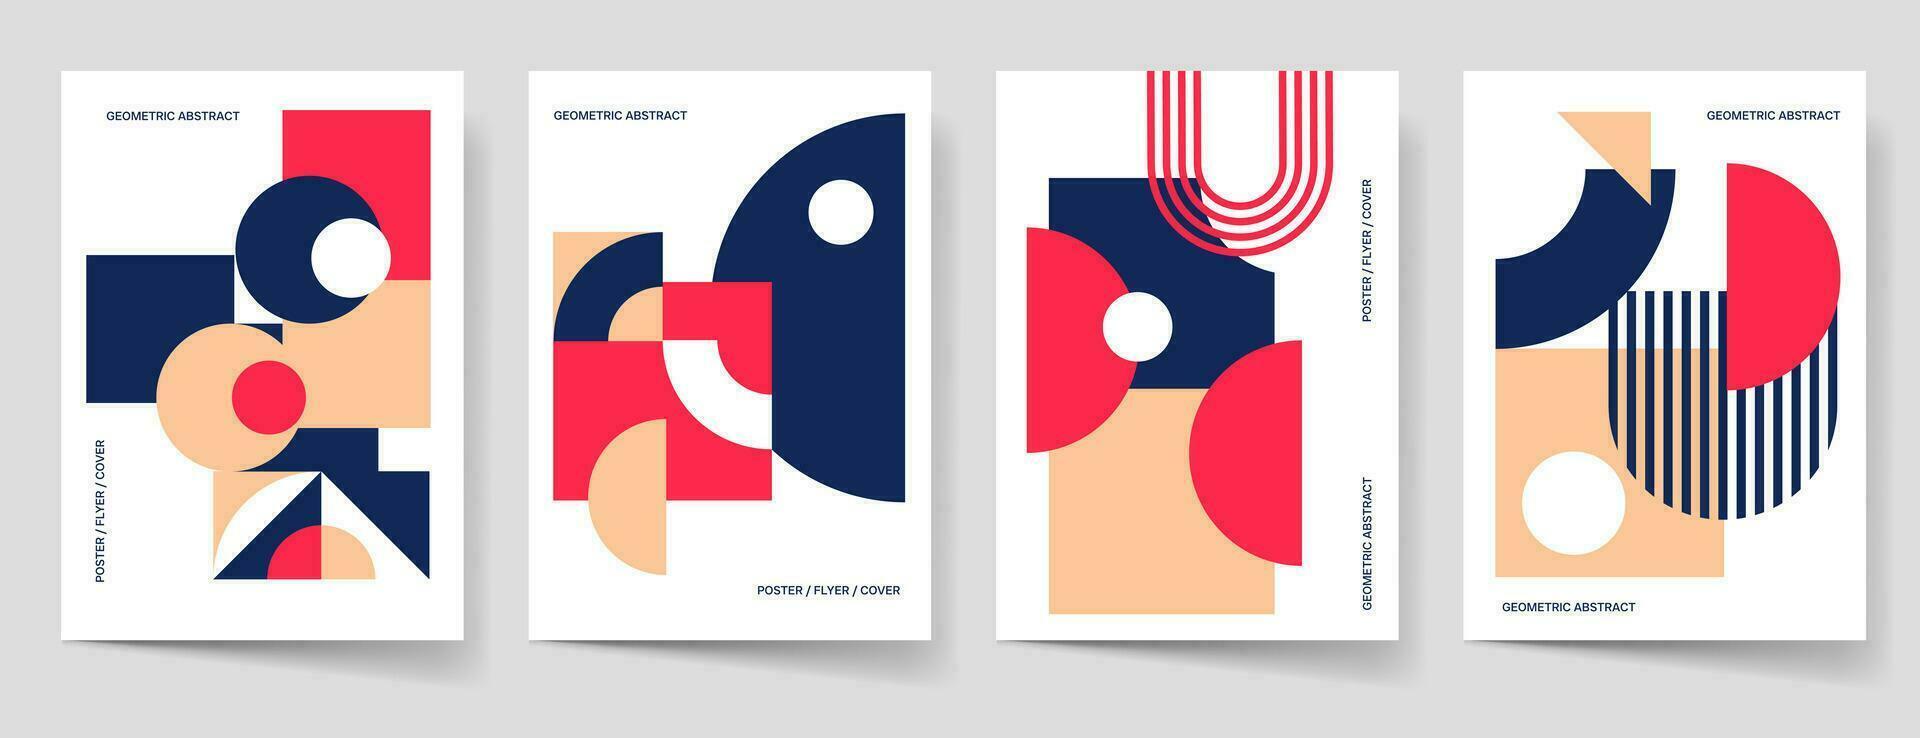 Geometric Cover Poster Design. Trendy Abstract Shape Background for Magazine Brochure Flyer and Page Layout. Vector Illustration